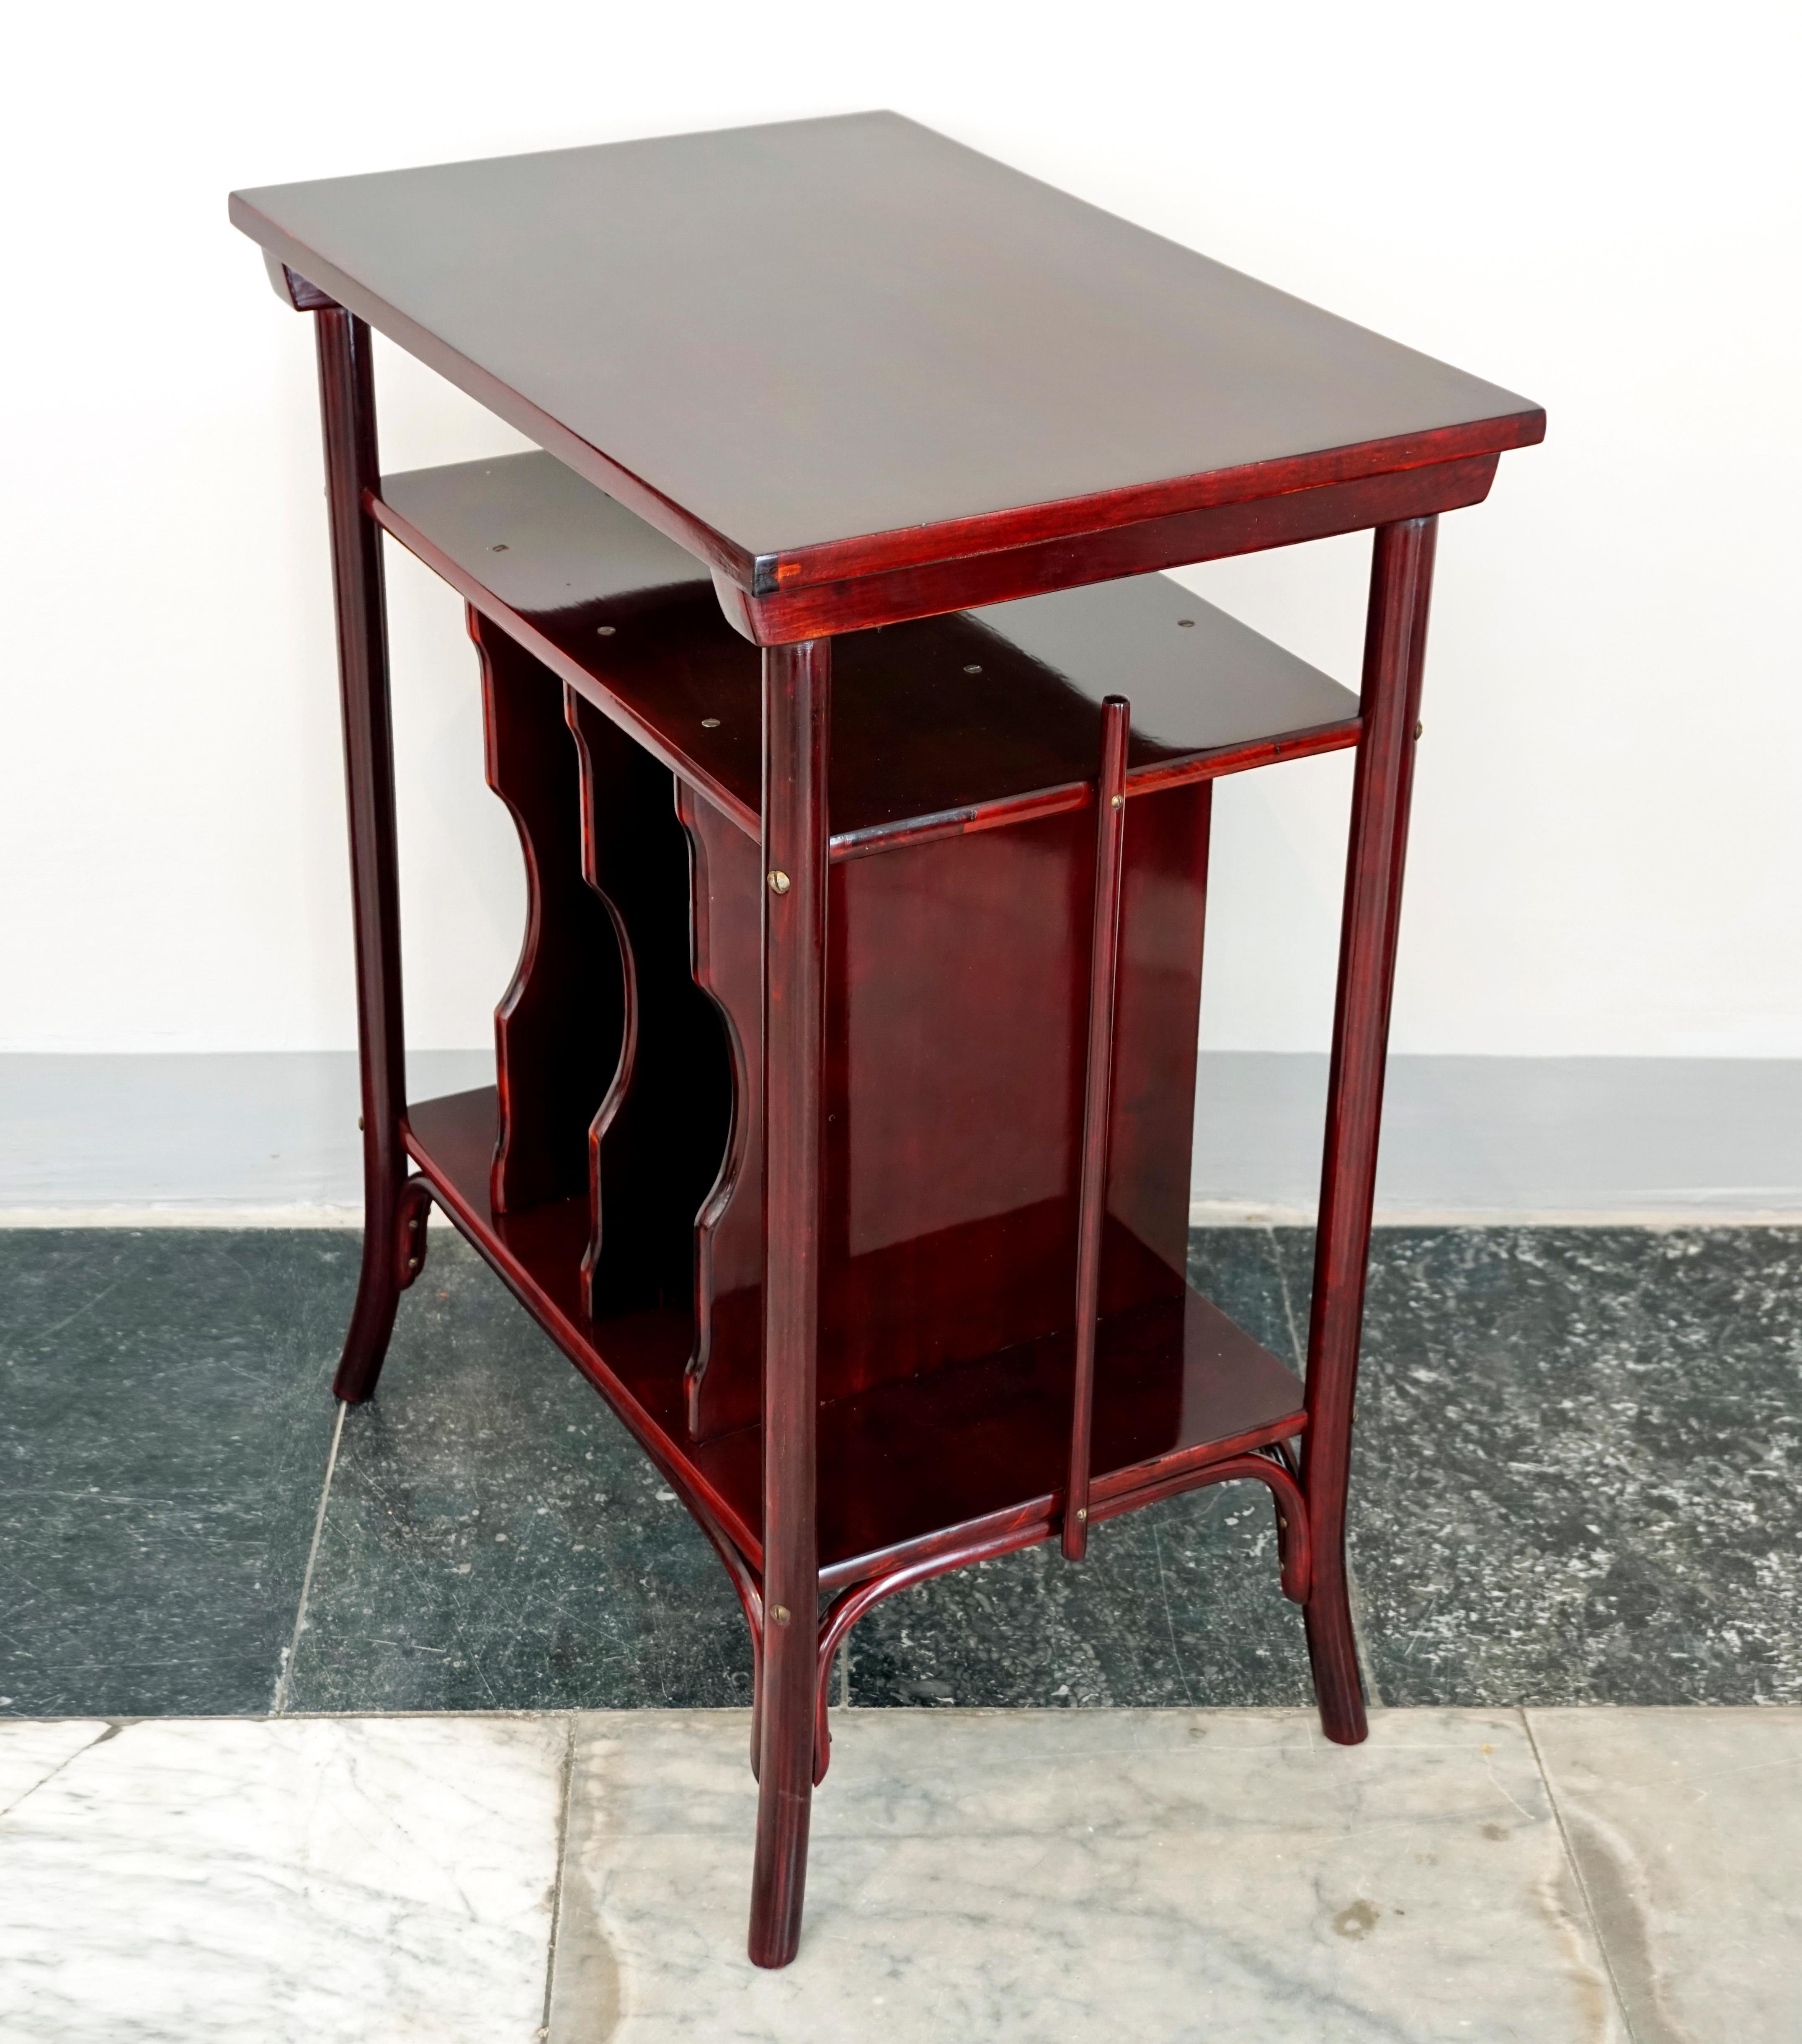 Austrian Thonet Vienna Art Nouveau Music Table, Mahogany stained, Around 1900